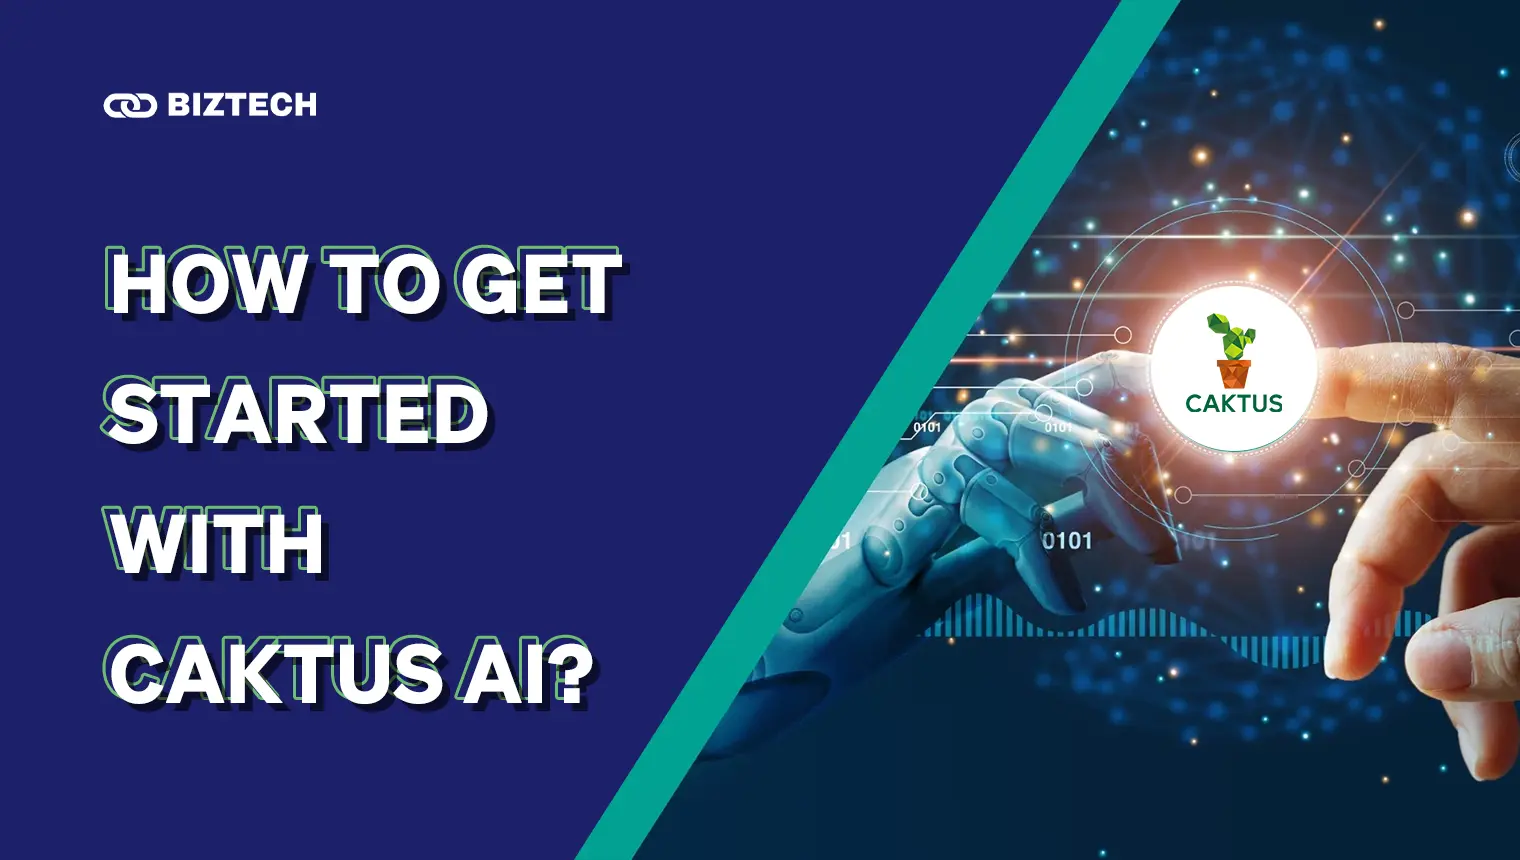 How to Get Started With Caktus AI